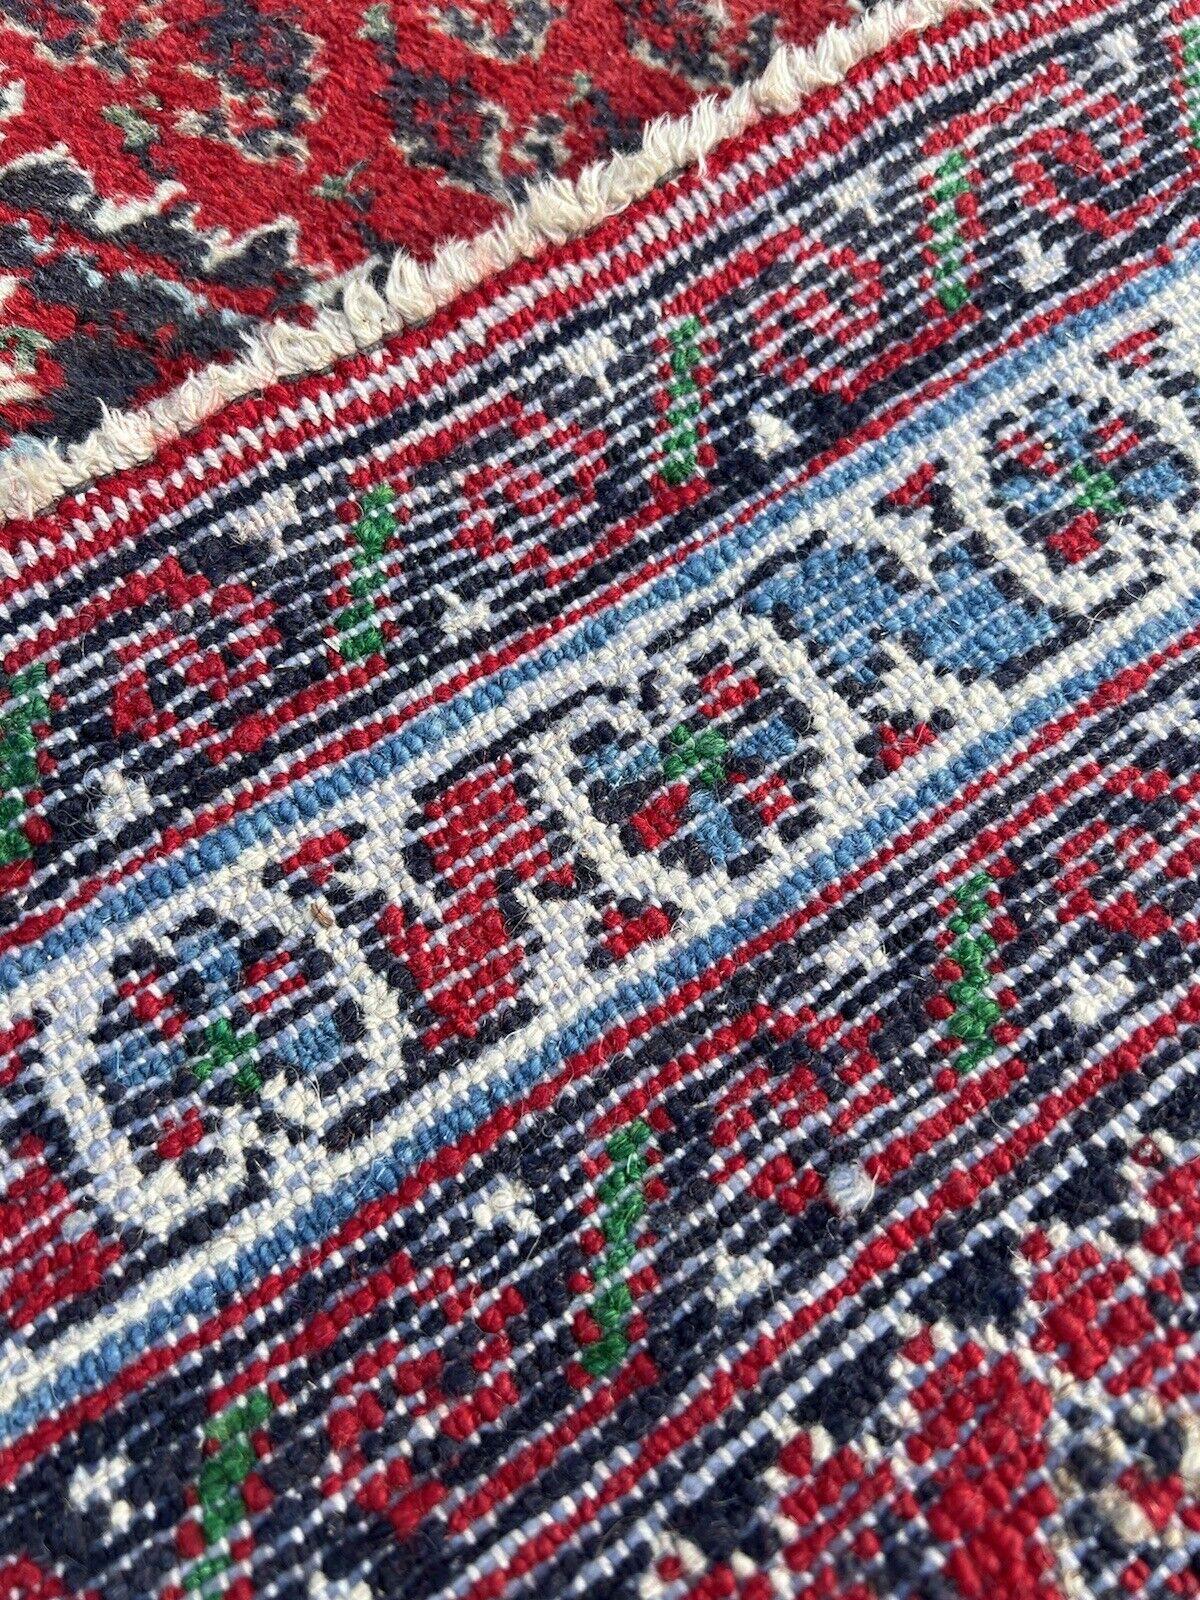 Immerse yourself in the rich heritage of Persian weaving with this Handmade Vintage Persian Style Hamadan Rug. Crafted in the 1970s, this rug measures 2.1’ x 2.9’ (67cm x 89cm) and is a testament to the enduring artistry of Hamadan weavers.

The rug